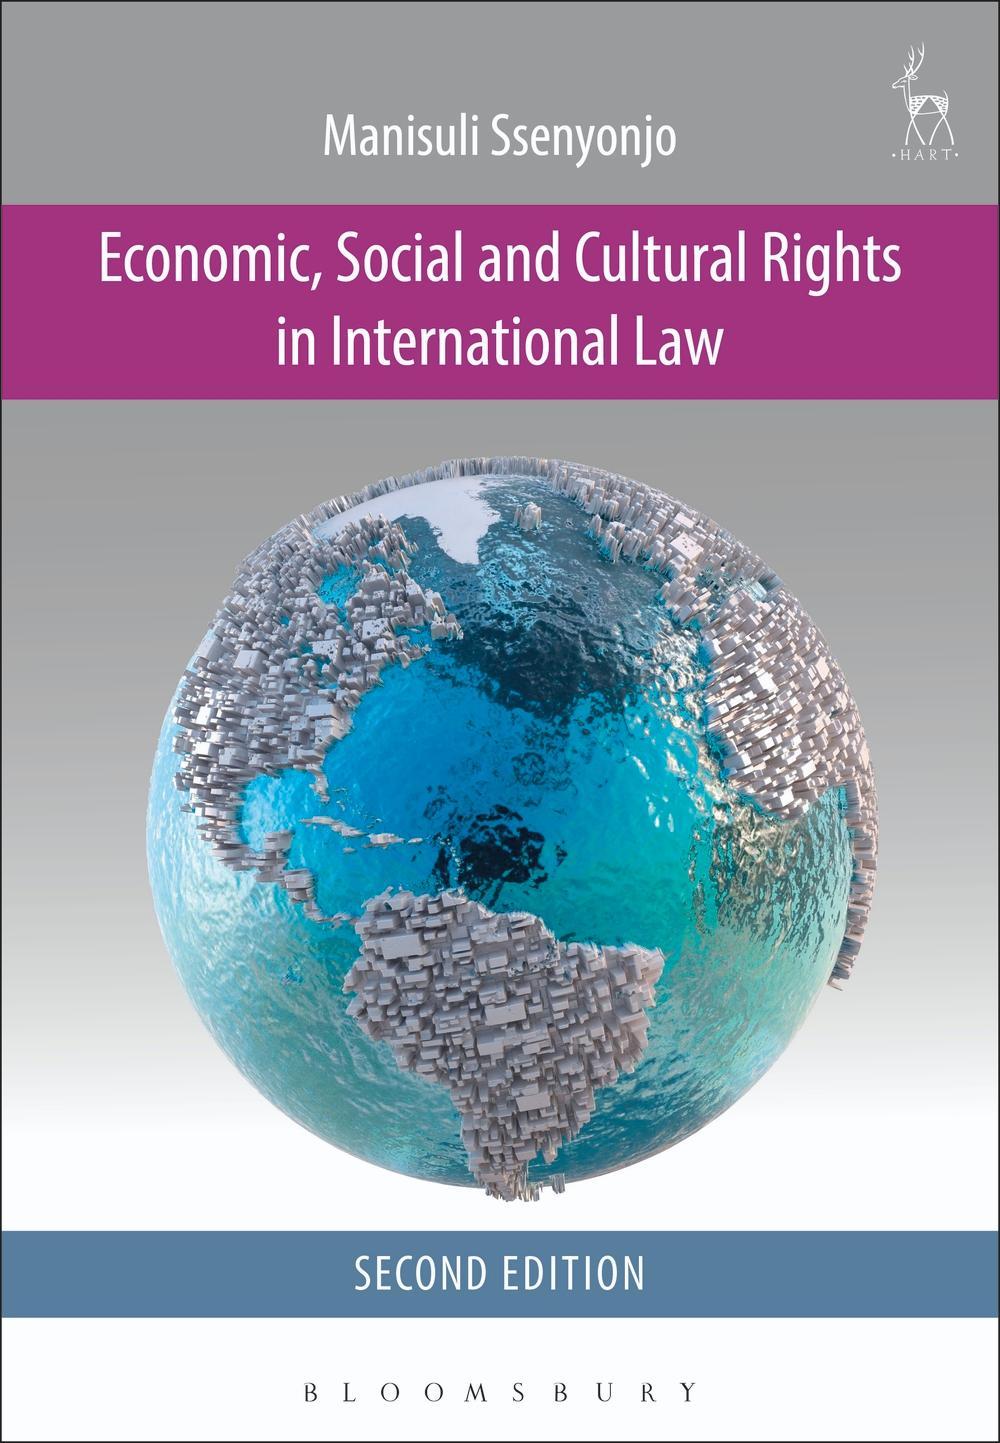 Economic, Social and Cultural Rights in International Law - Manisuli Ssenyonjo